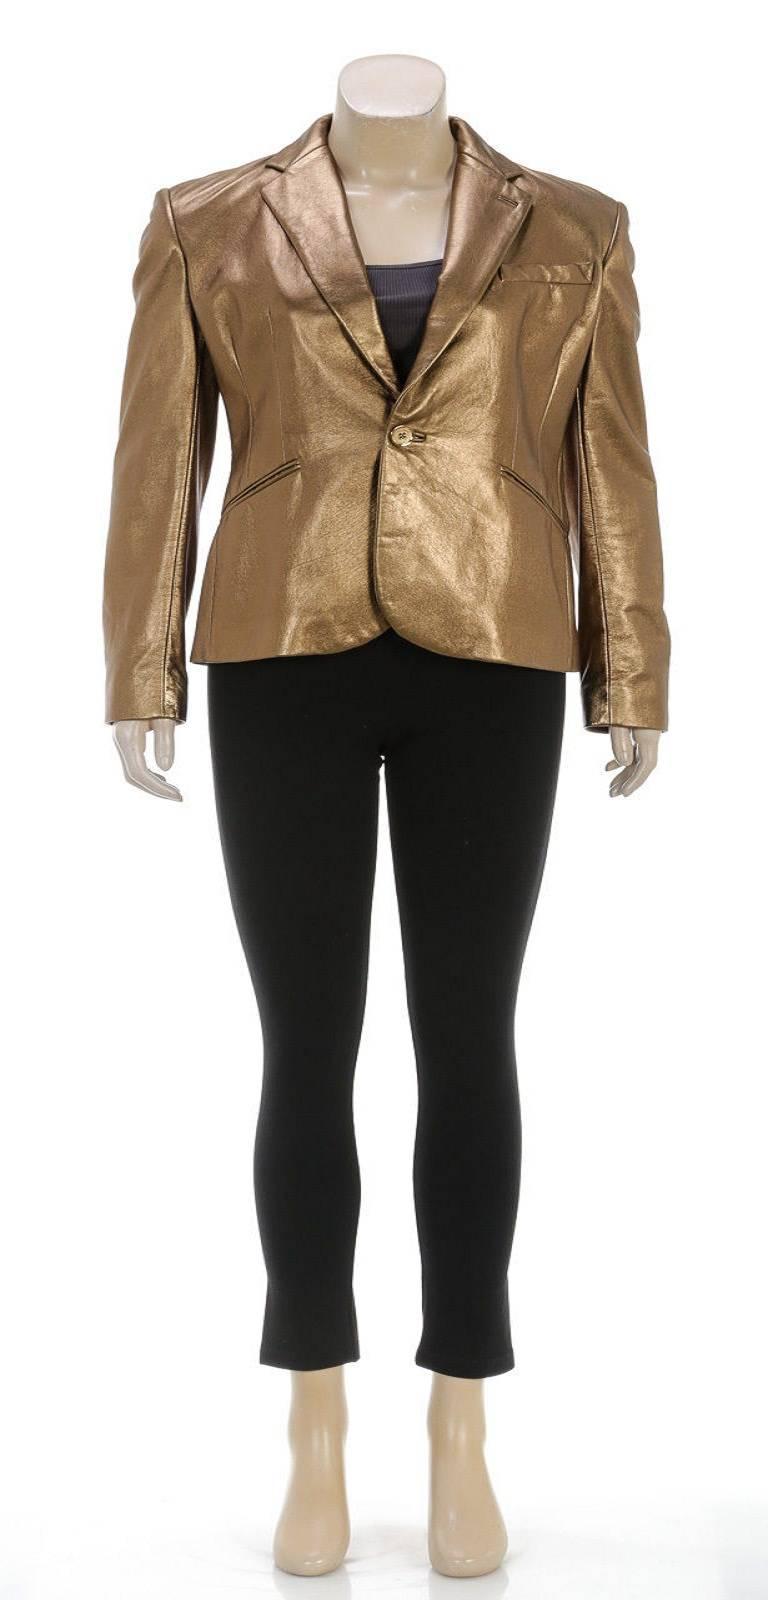 Designer: Ralph Lauren
Type: 
Clothing
Condition: 
NEW
Color: 
Gold
Material: 
100% Leather
Dimensions: 
Bust: 34